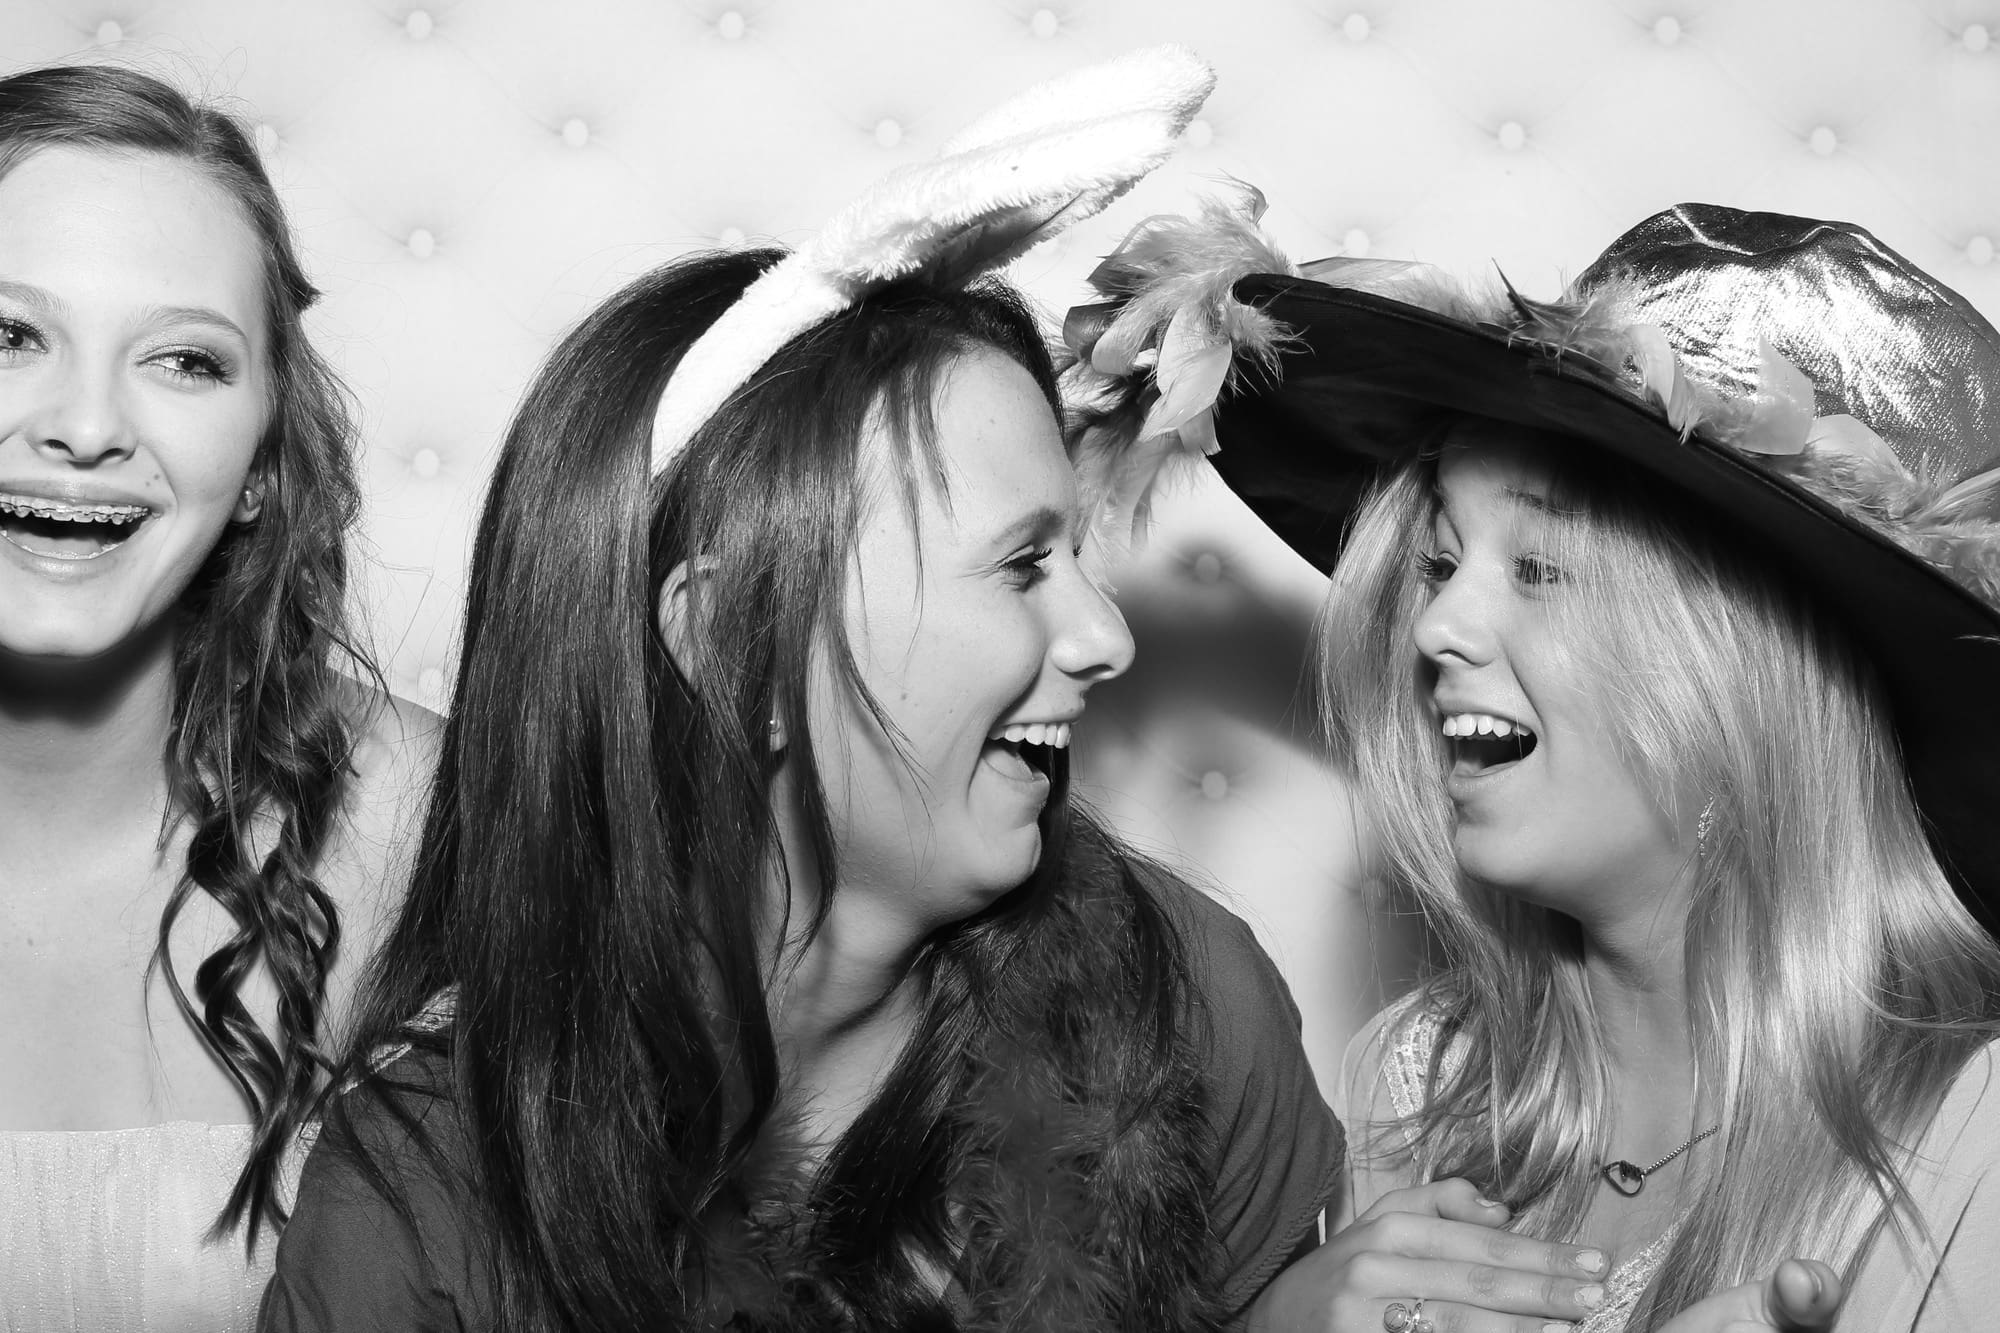 Photo Booth-Rental-No.1-Austin-County Line BBQ-Sweet-Sixteen-Birthday-Teens-Memories-Awesome-Props